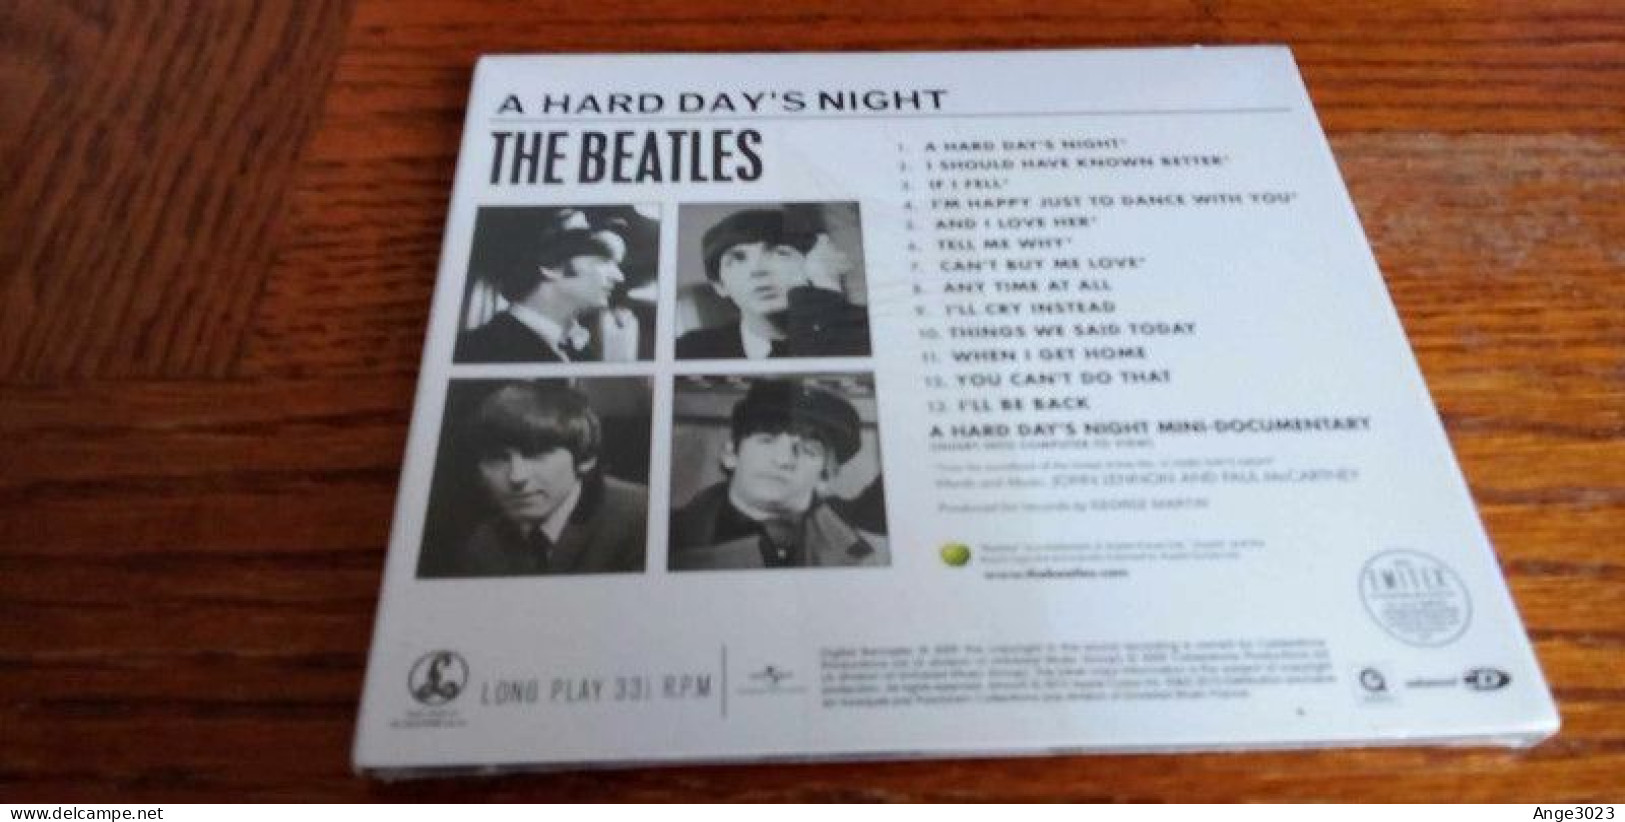 THE BEATLES "A Hard Day's Night" - Rock